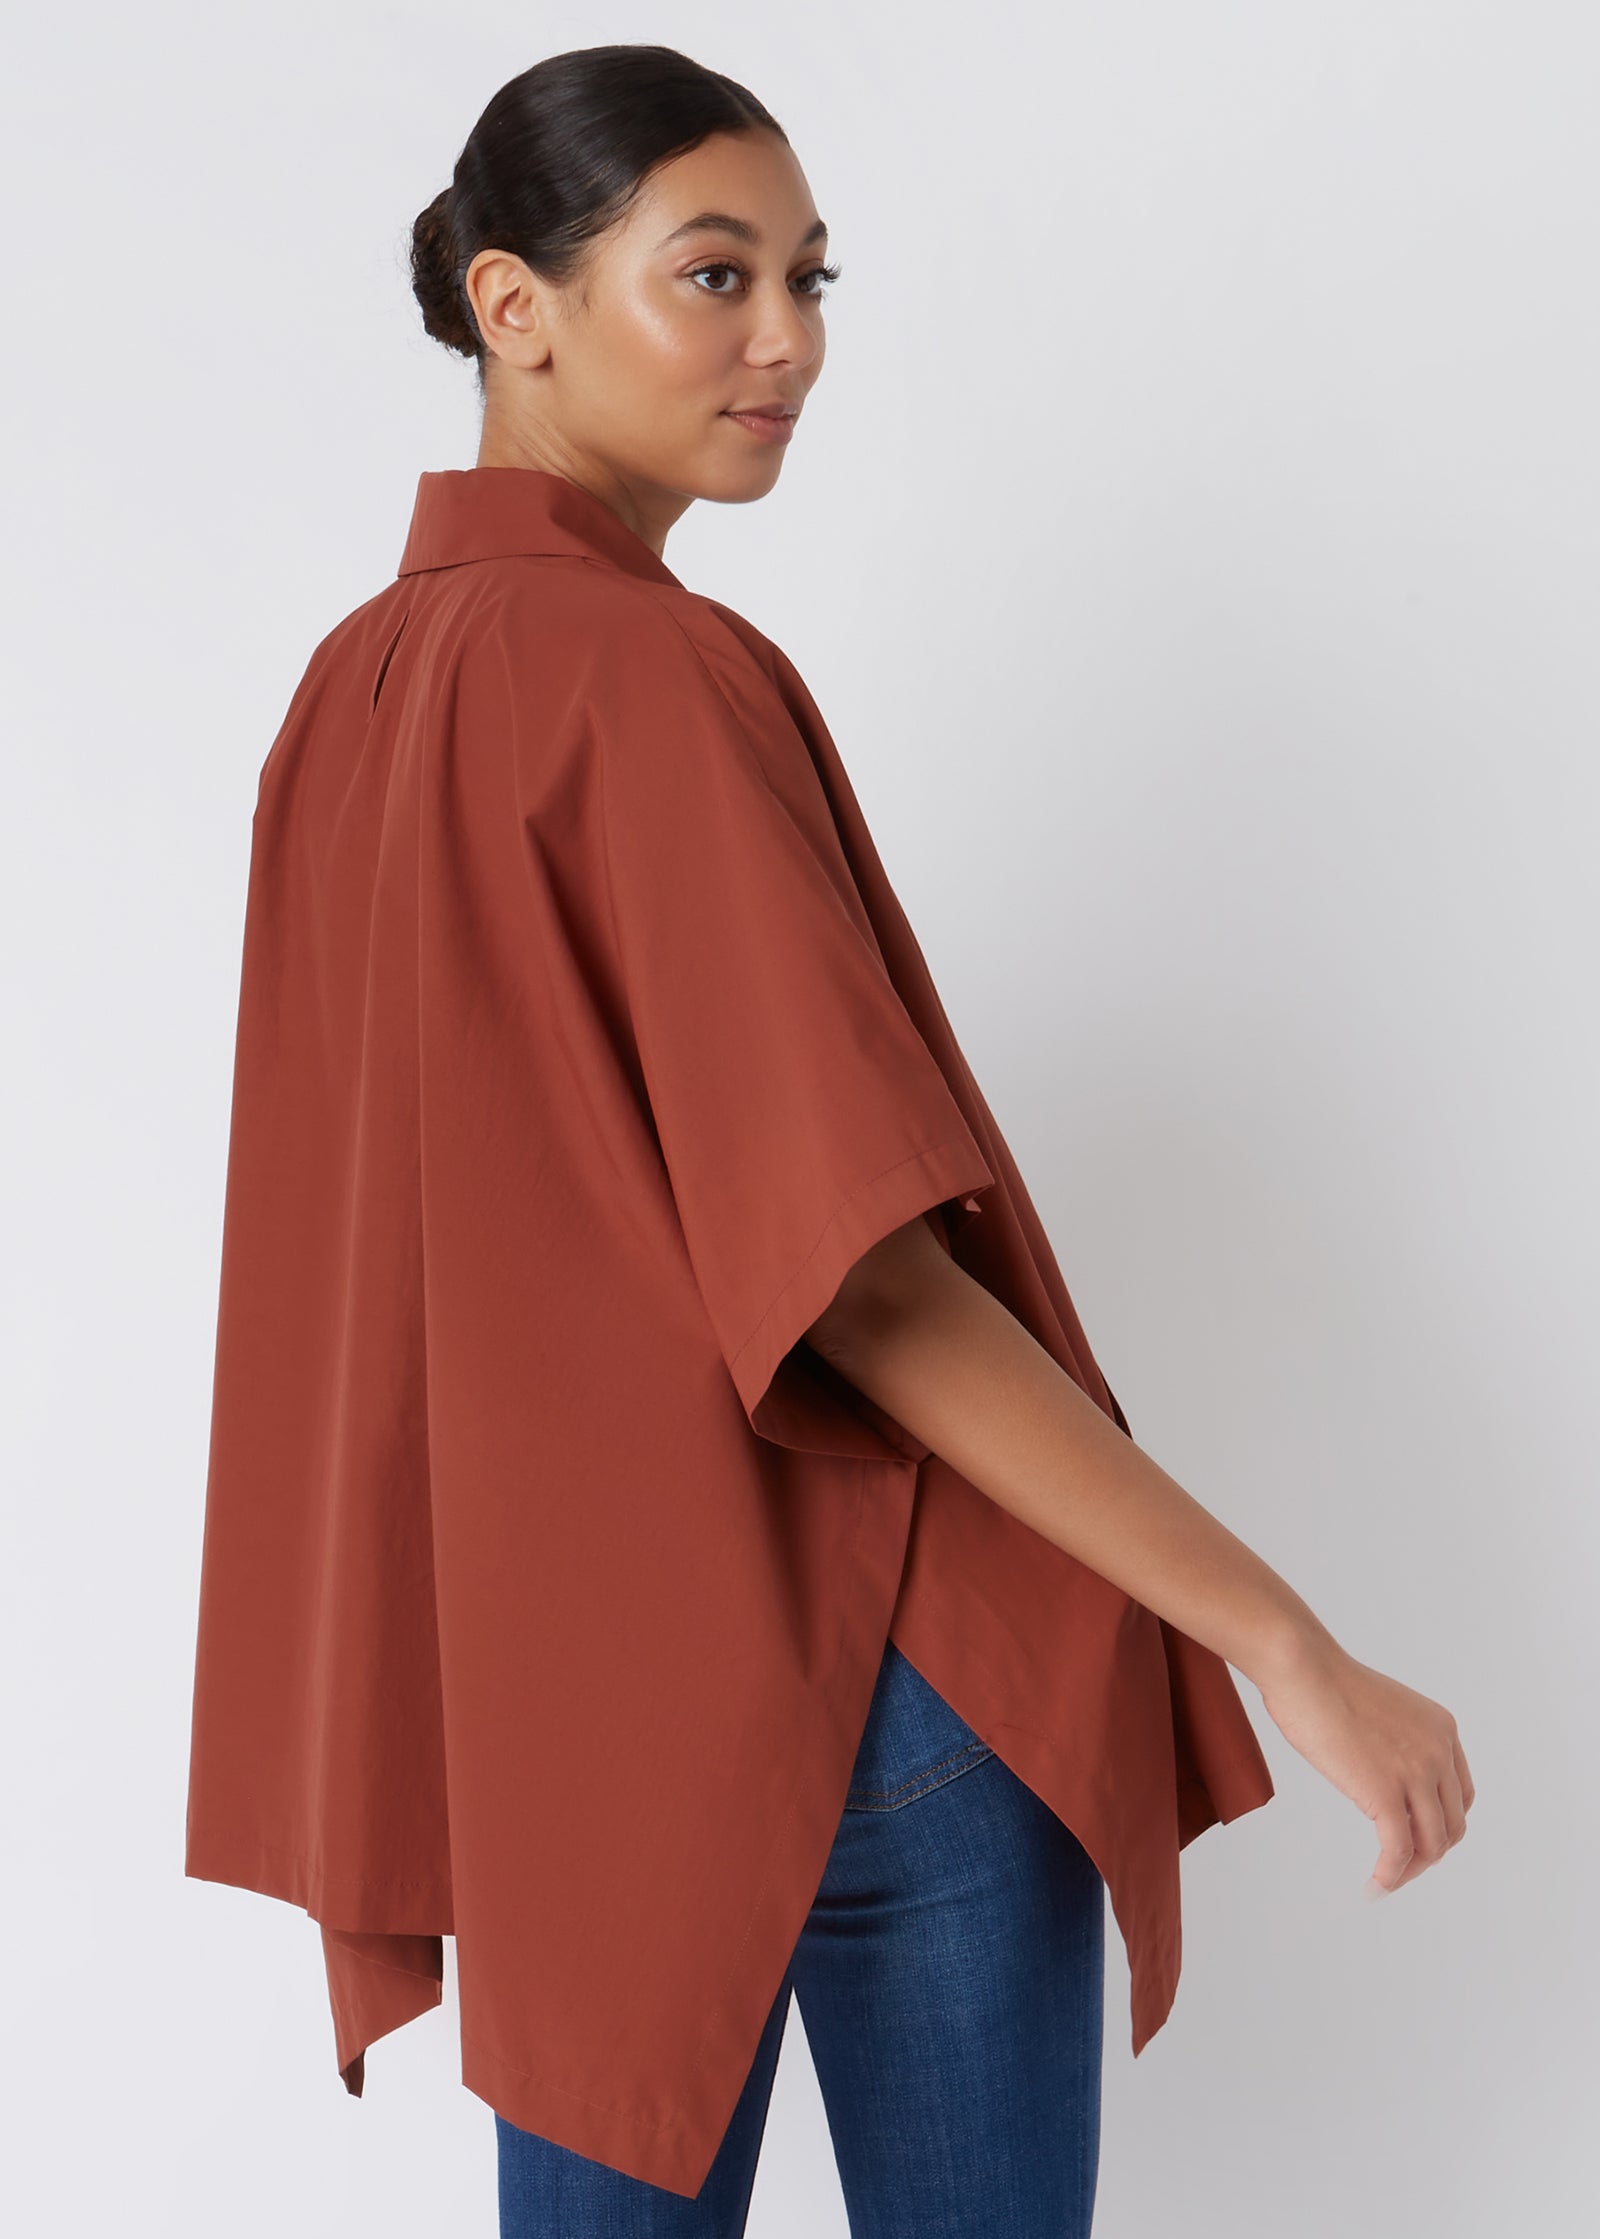 Kal Rieman Pocket Poncho in Rust Italian Broadcloth on Model Looking Back Cropped Back View